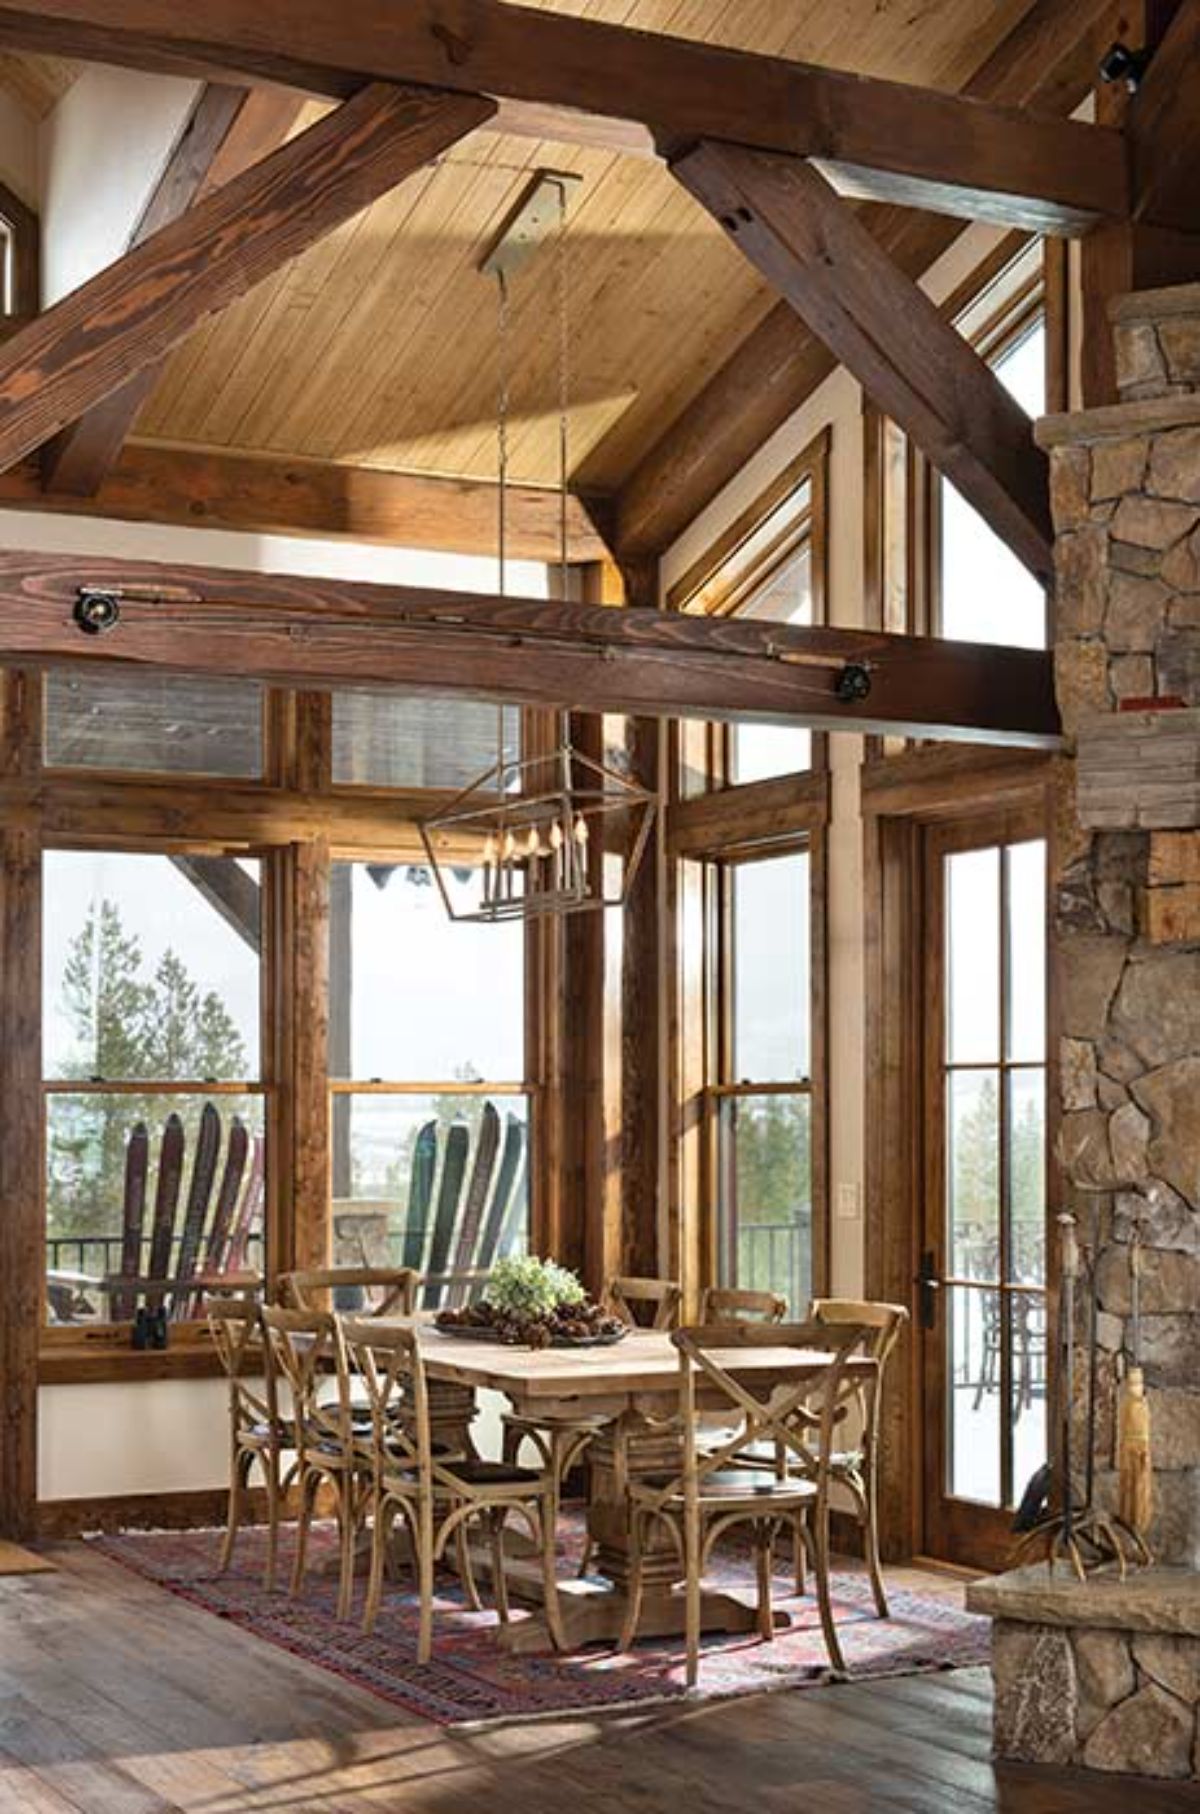 dining room with windows on all sides and view of Adirondack chairs outside window